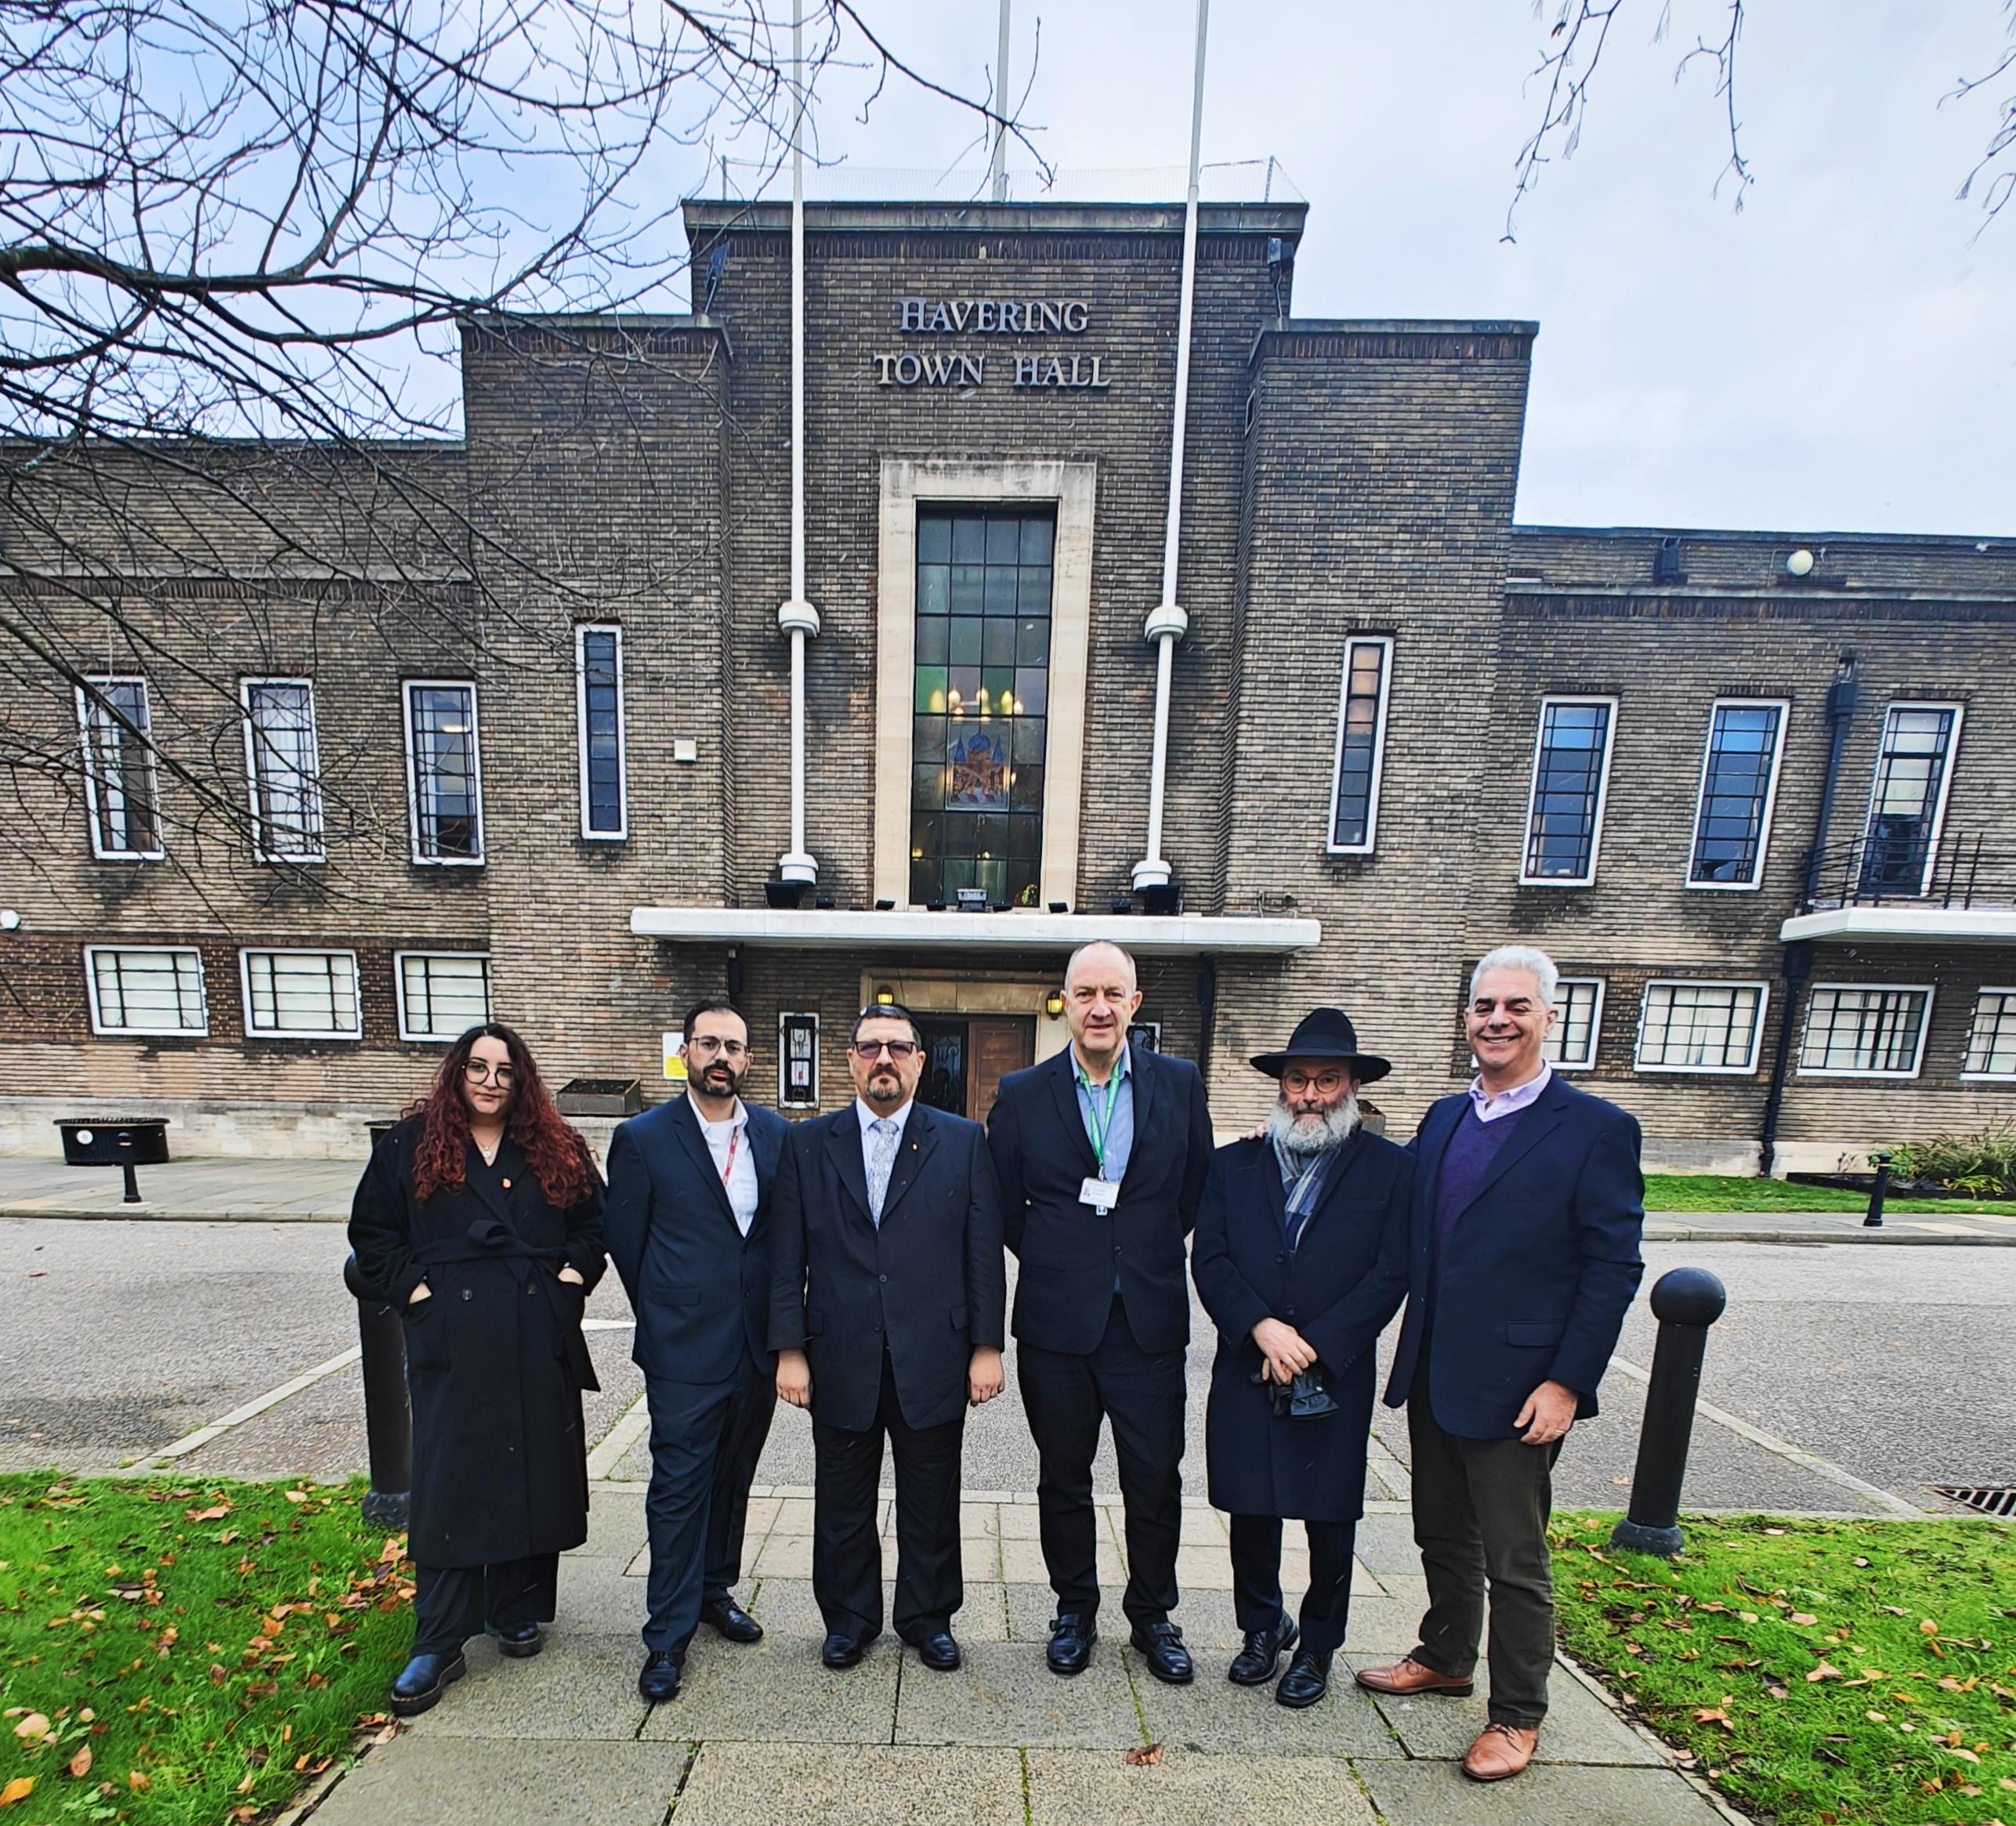 Jewish community leaders meet at the Havering Town Hall, Romford